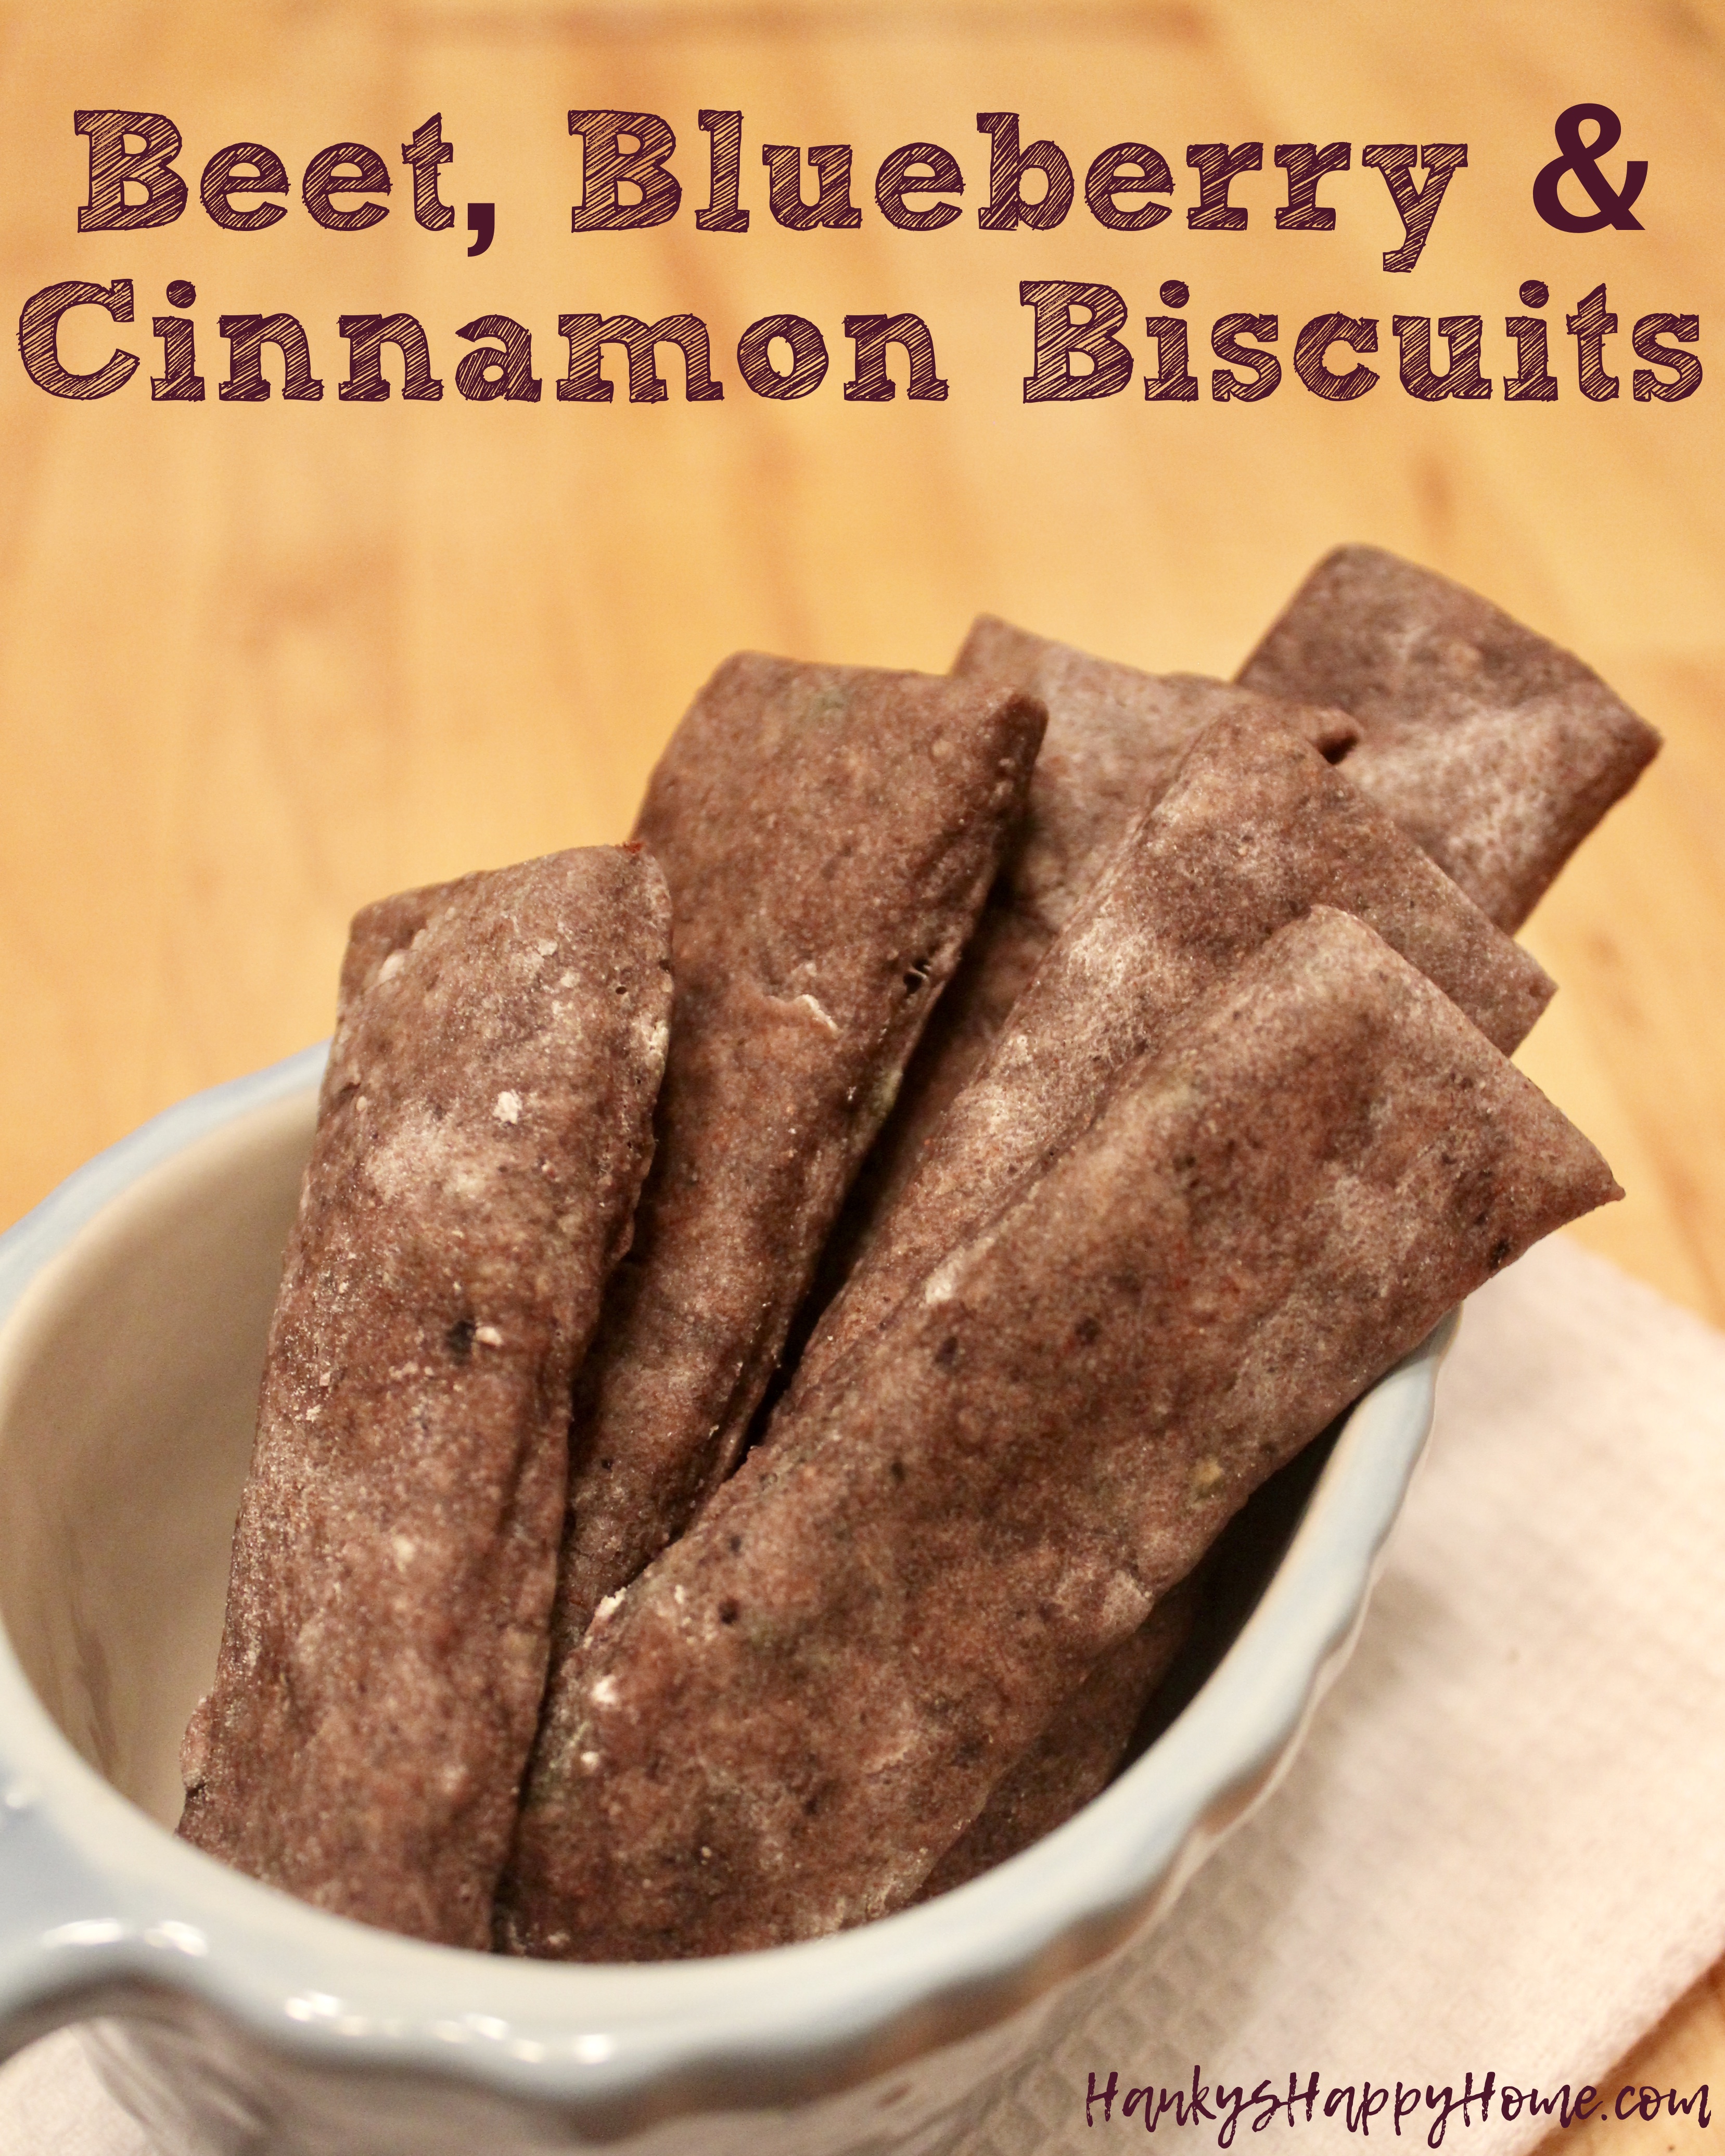 These homemade Beet, Blueberry & Cinnamon Biscuits are perfect for transitioning from purees to table foods!